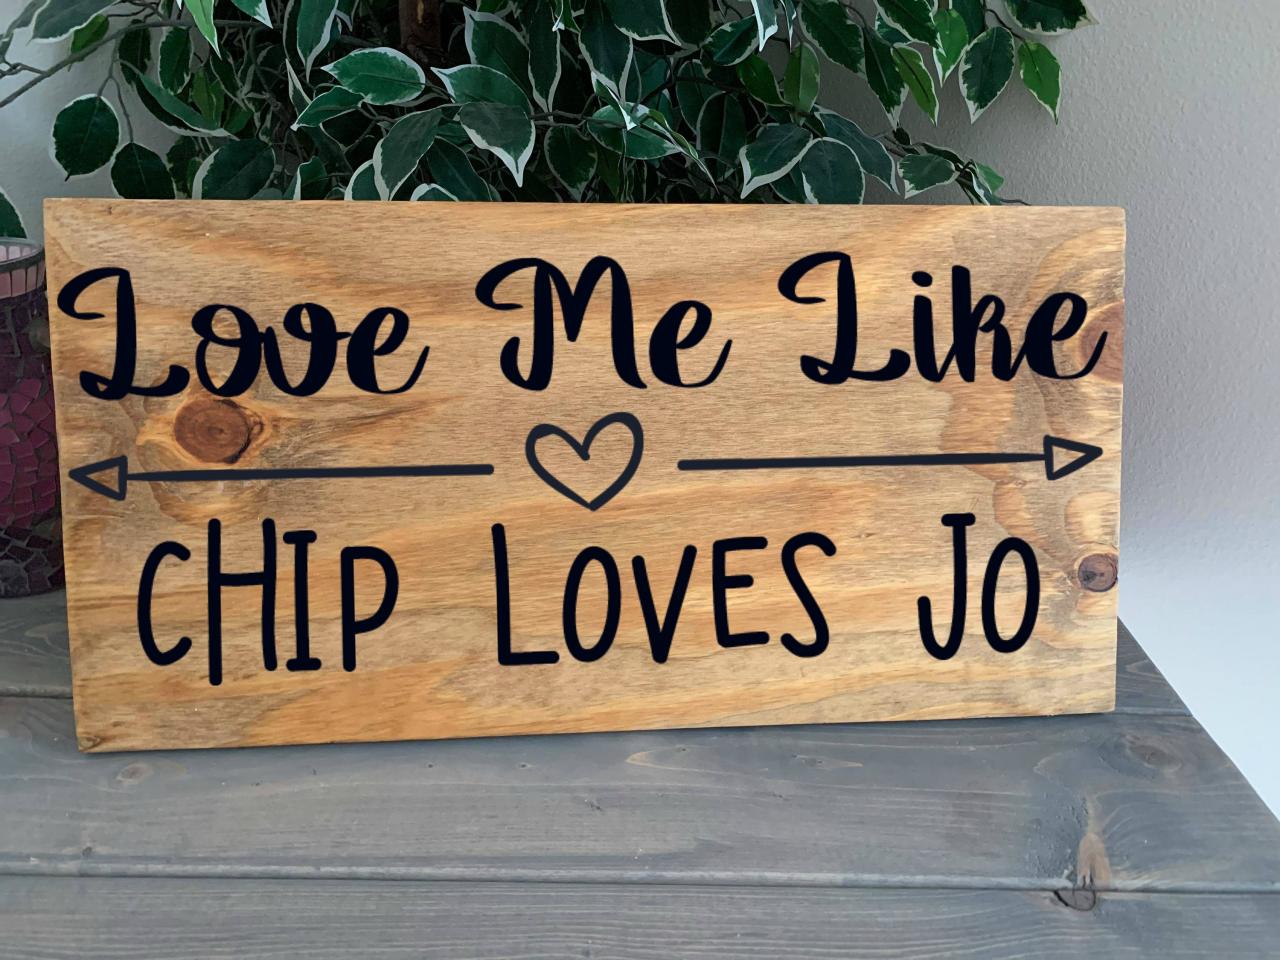 Love Me Like Chip Loves Jo..12x24 Hand Painted Wood Sign...